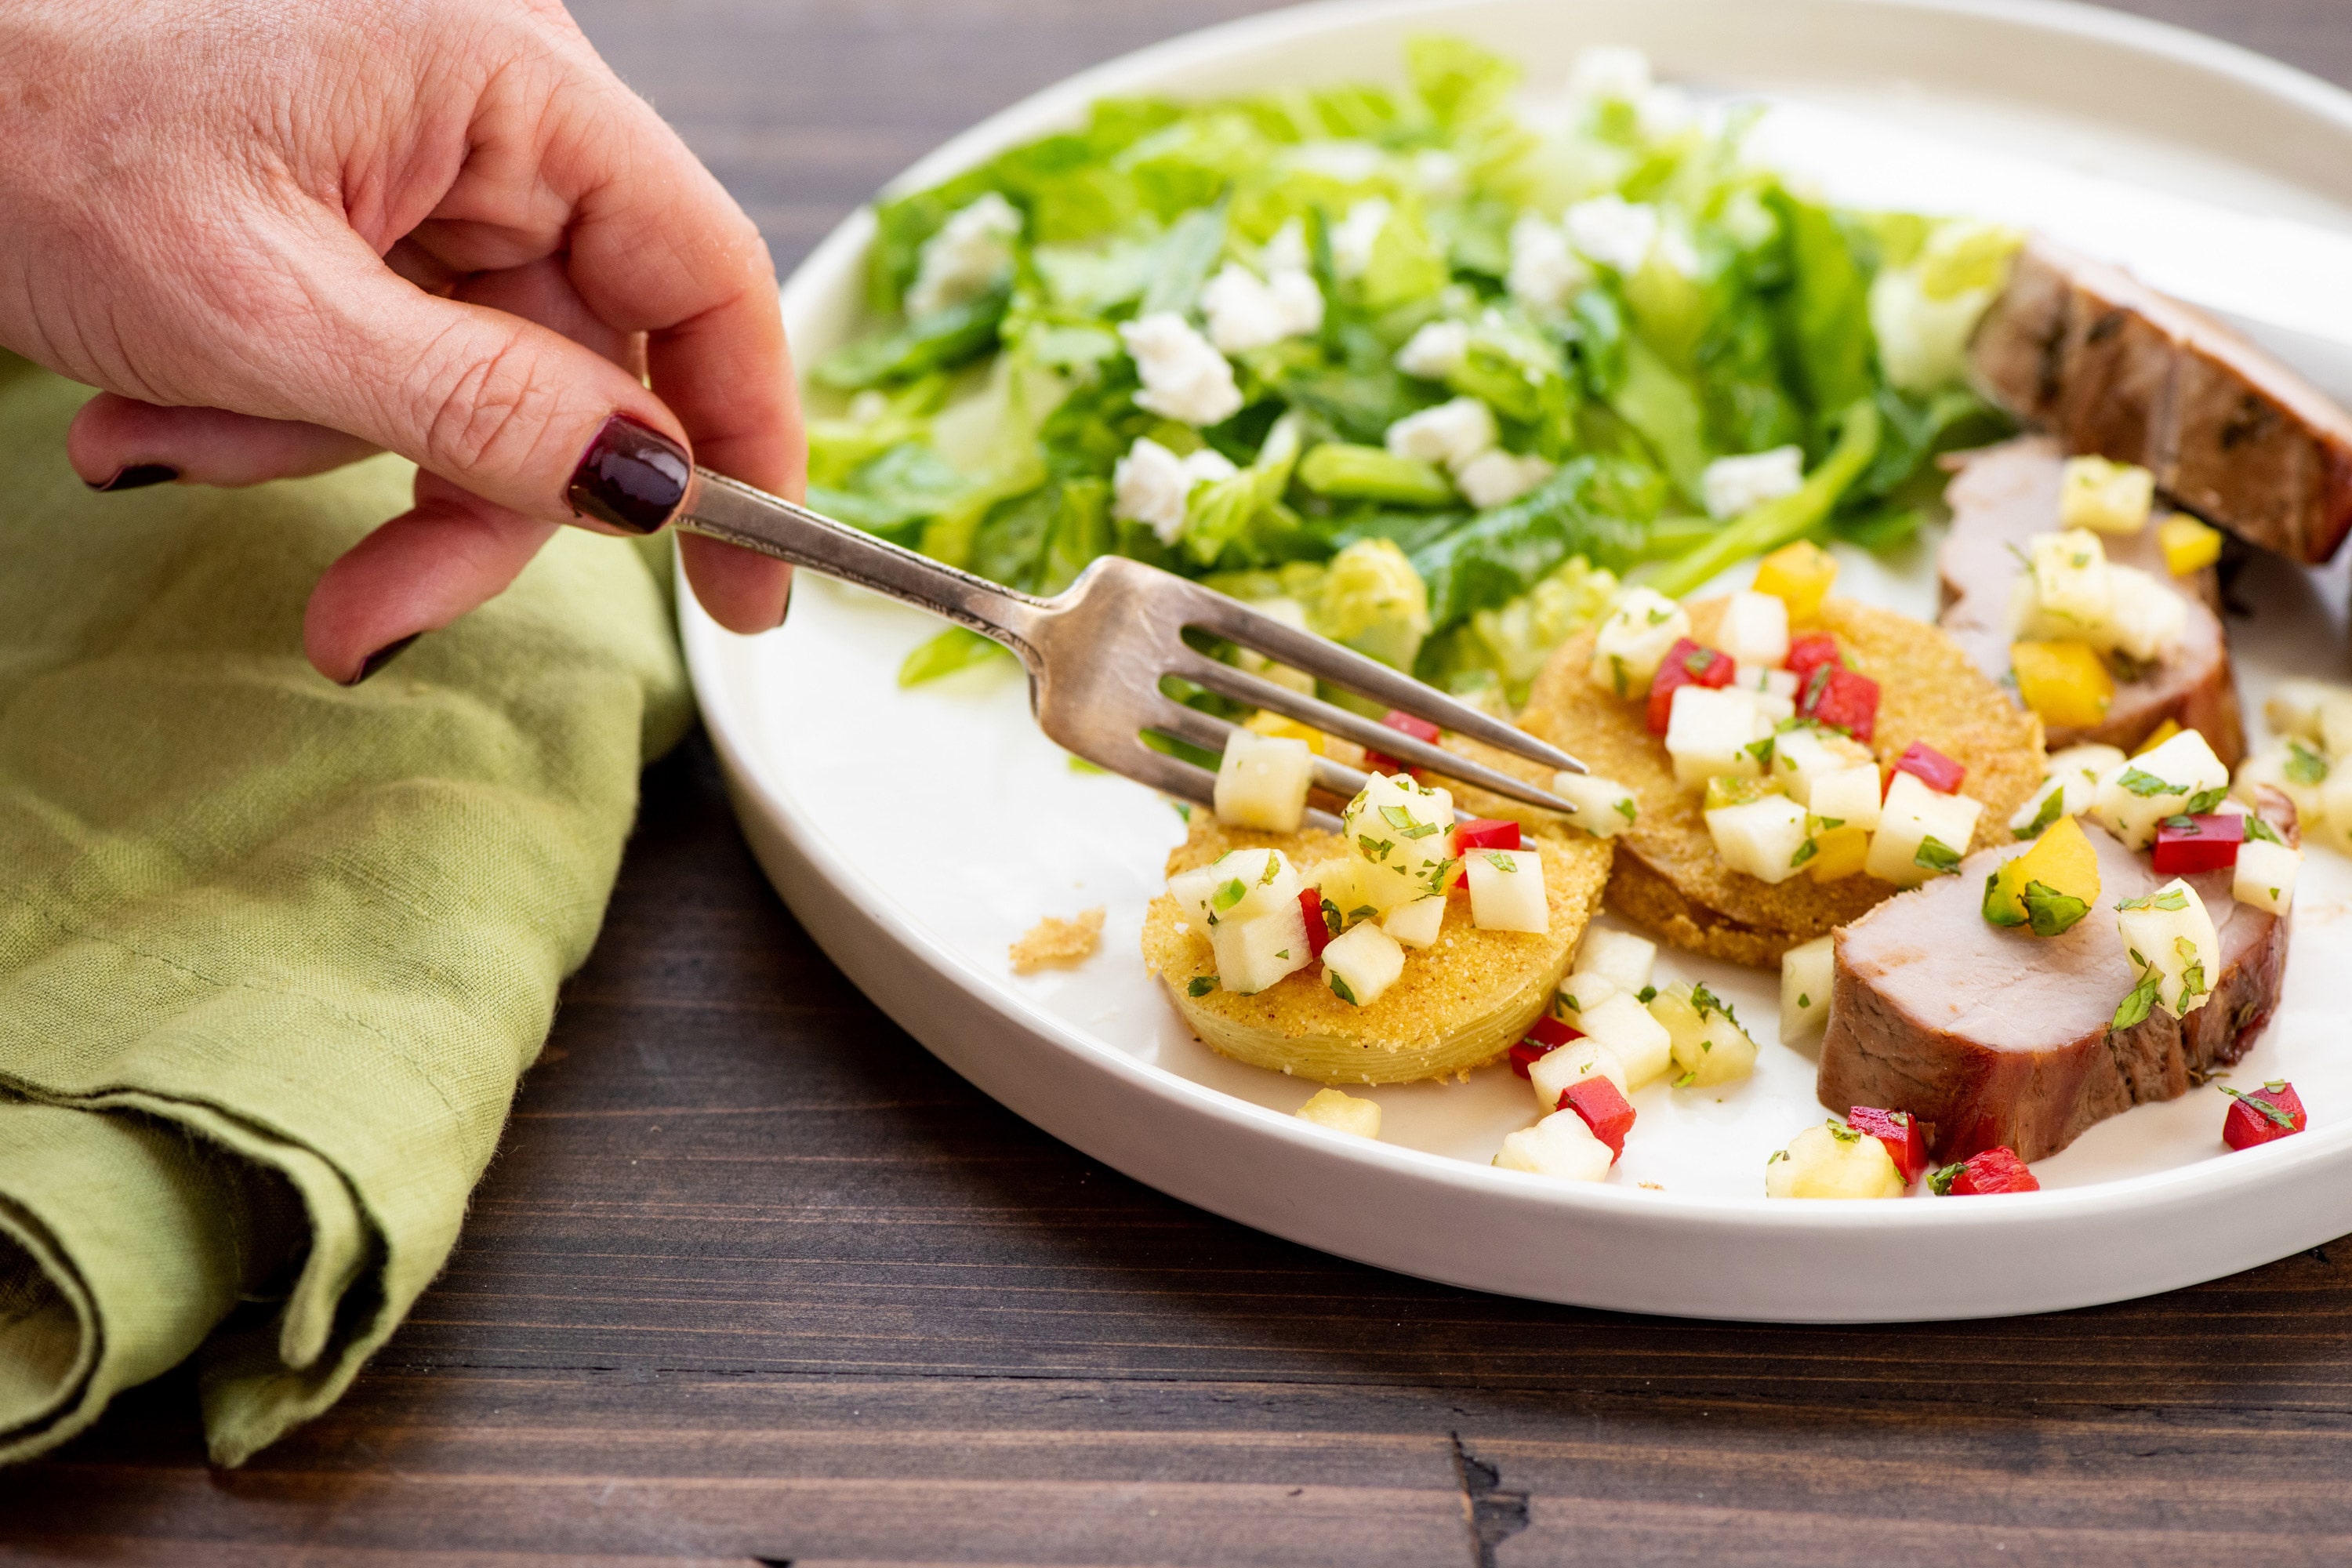 Woman slicing fried green tomato with fork on plate with pork tenderloin and salad.